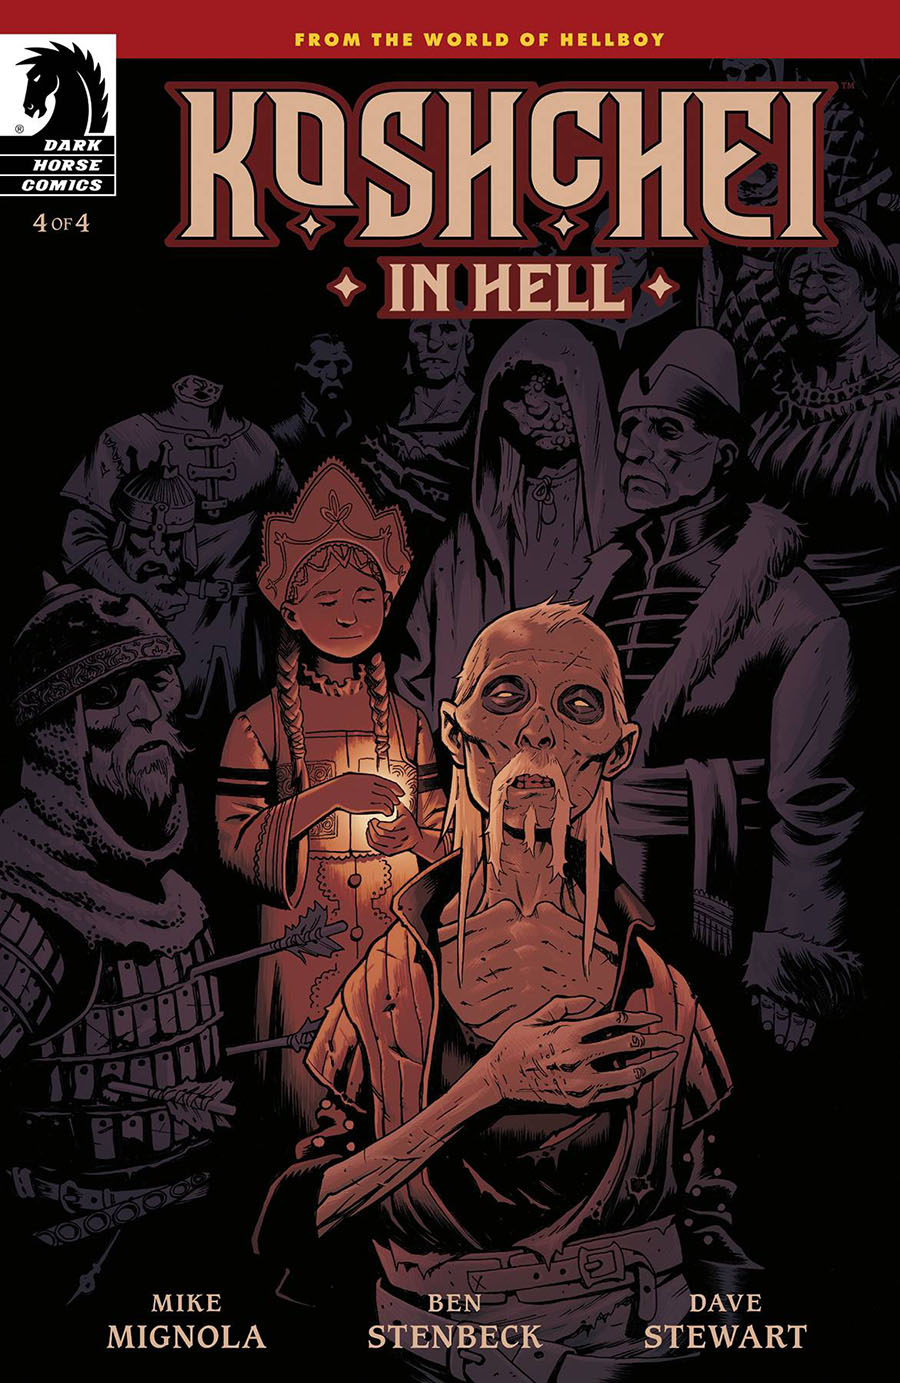 Koshchei The Deathless In Hell #4